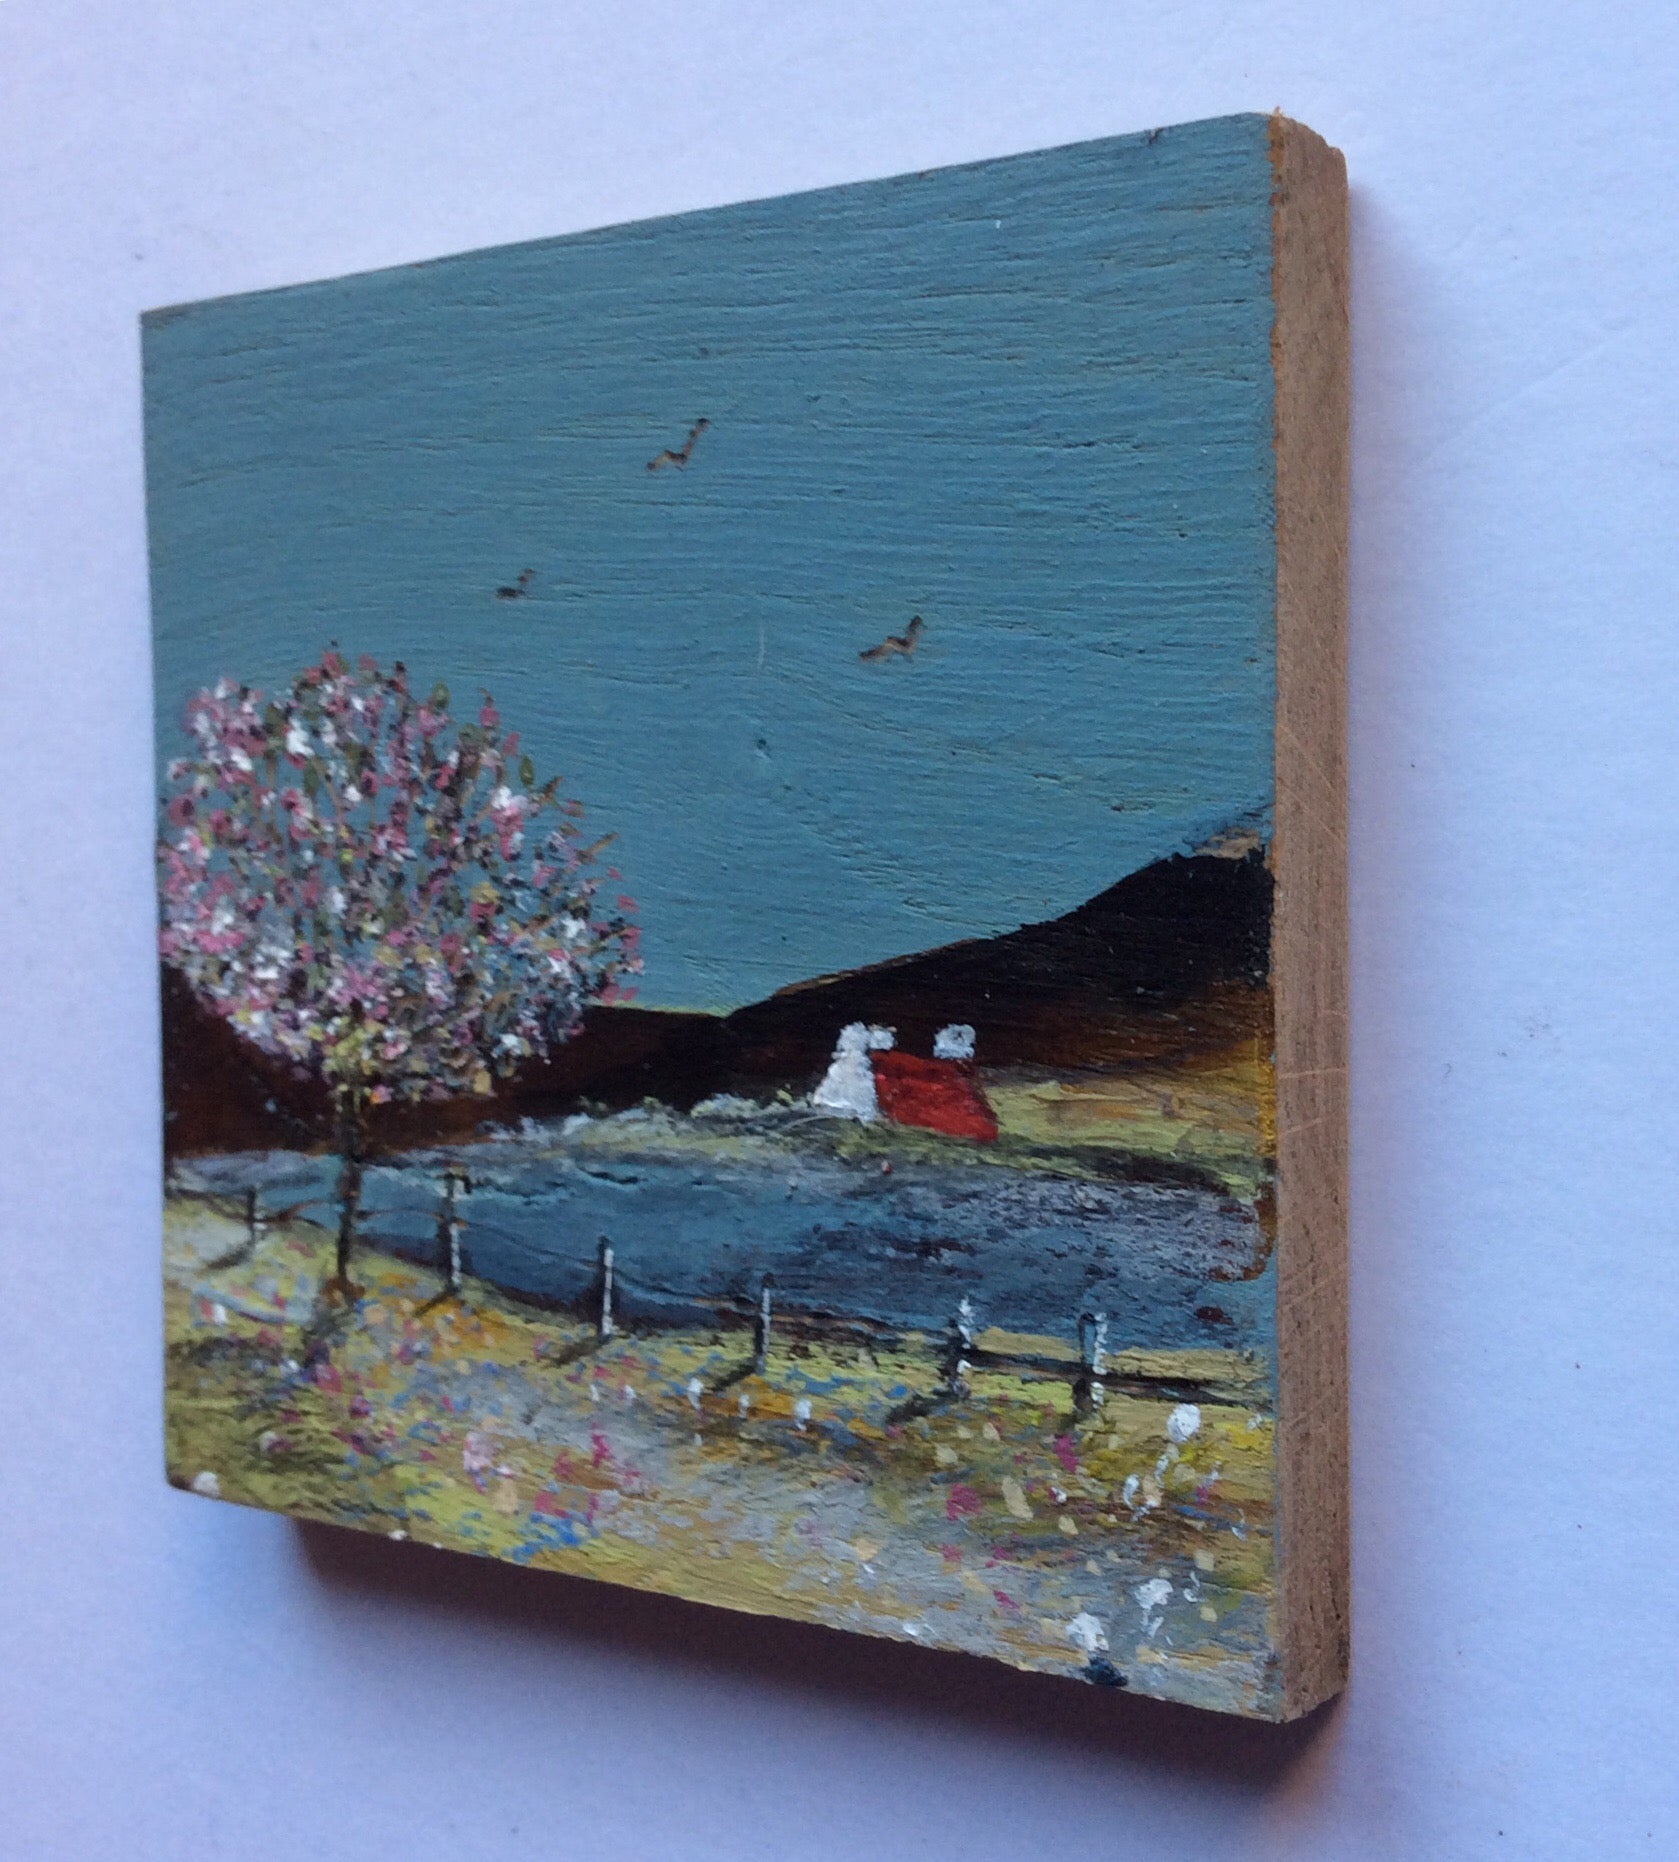 Mini Mixed Media Art on wood By Louise O'Hara - "Spring has arrived"